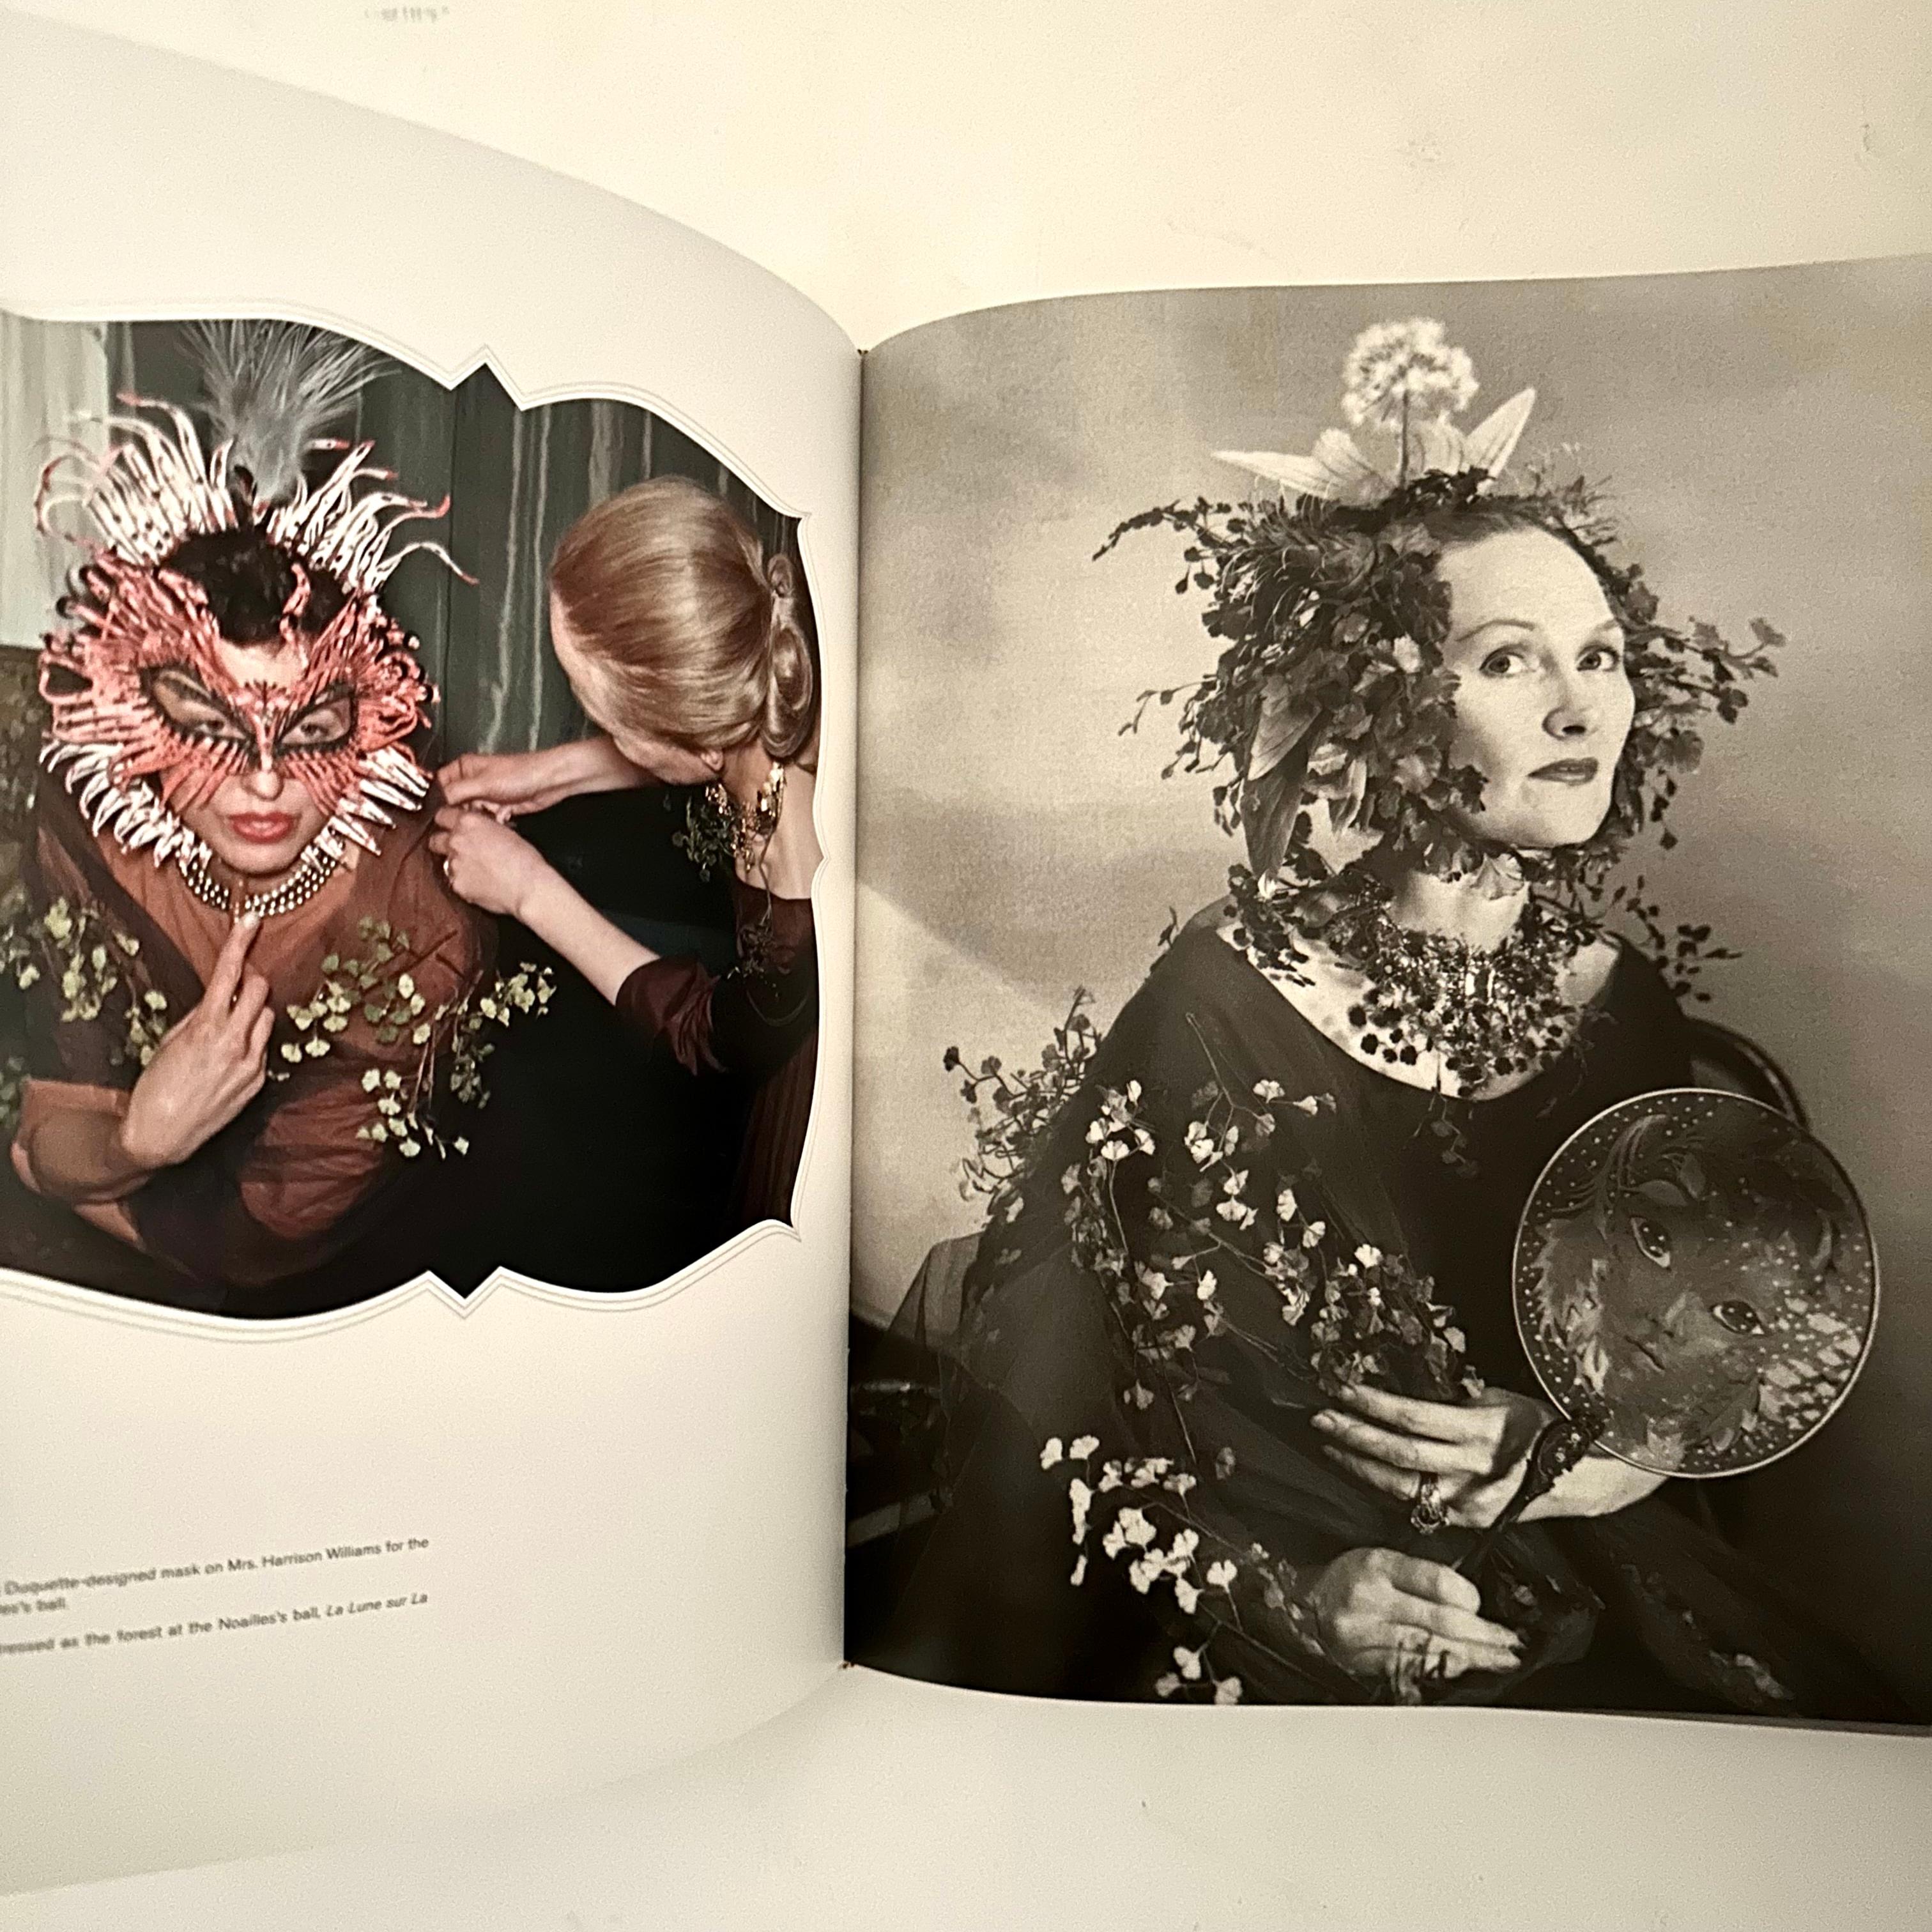 Published by Harry N. Abrams, 1st edition, New York, 2007. Hardback with English text. Foreword by Dominick Dunne.“We’re entering a maximalist epoch, and Tony is a maximalist icon,”

Whether it was set design, costume, jewellery or interior,